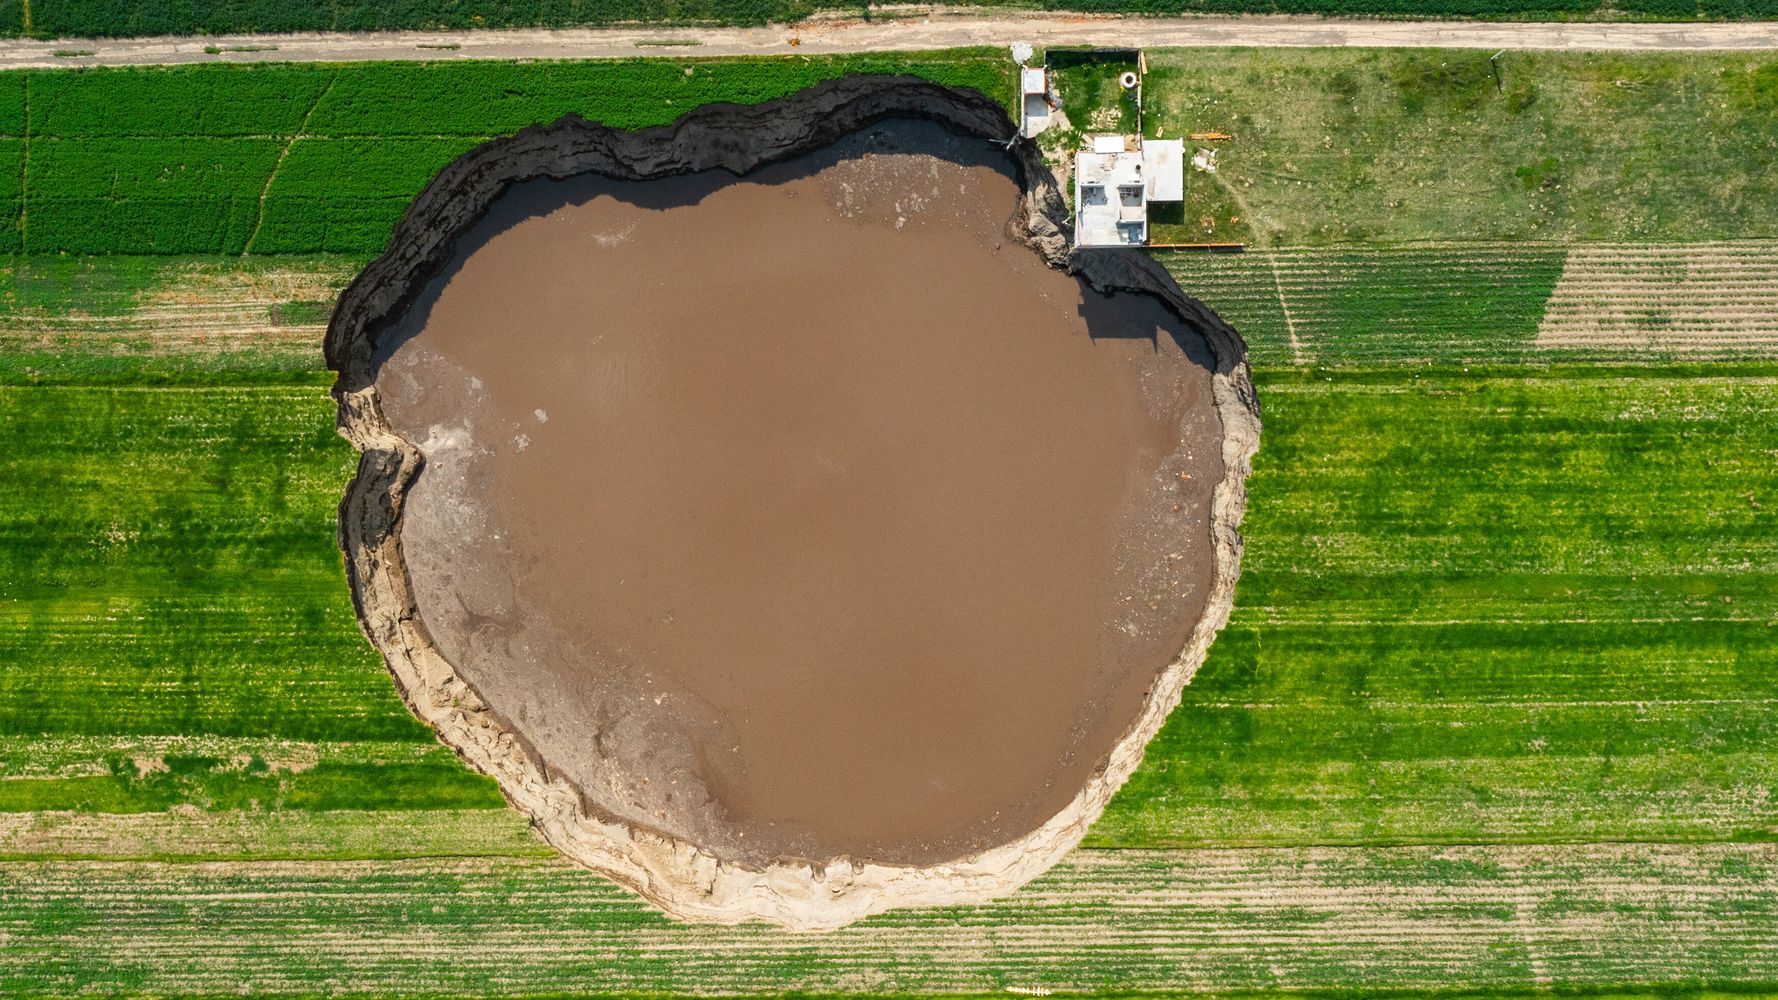 Sinkhole Grows To Size Of Football Field, Threatens House And Traps 2 Dogs